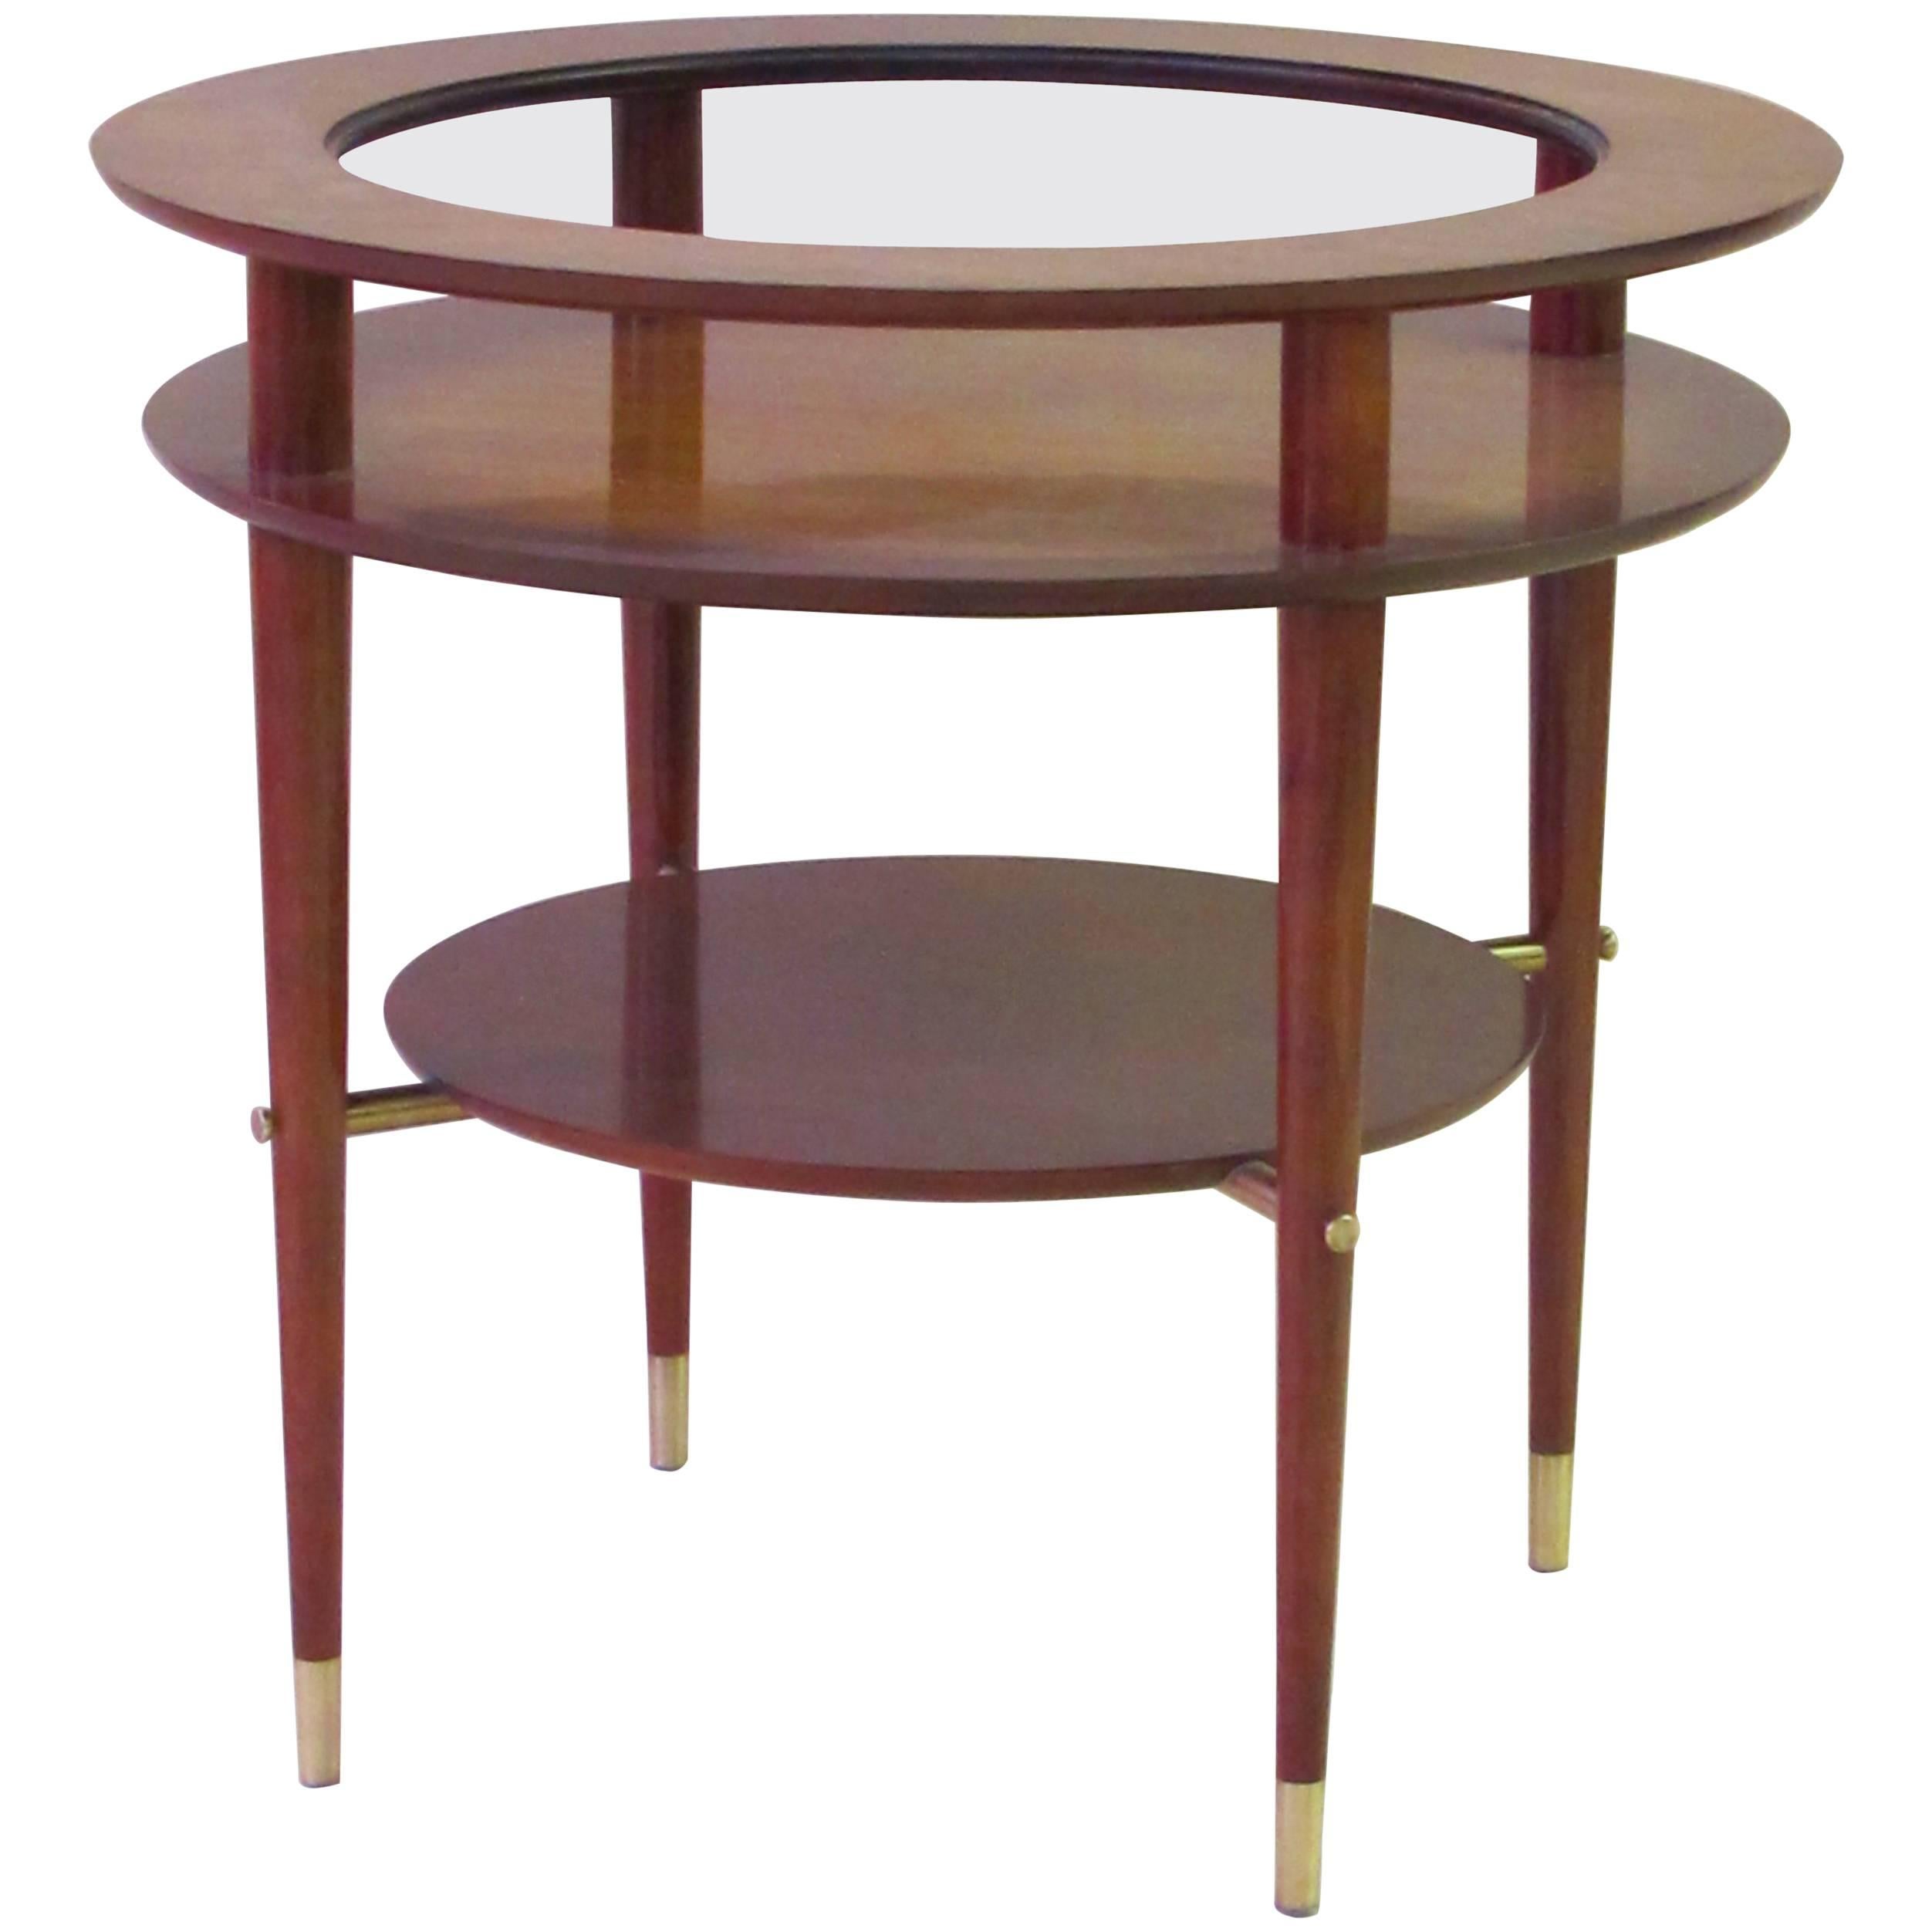 Stylish Italian Midcentury Circular Side Table with Glass Top and Brass Fittings